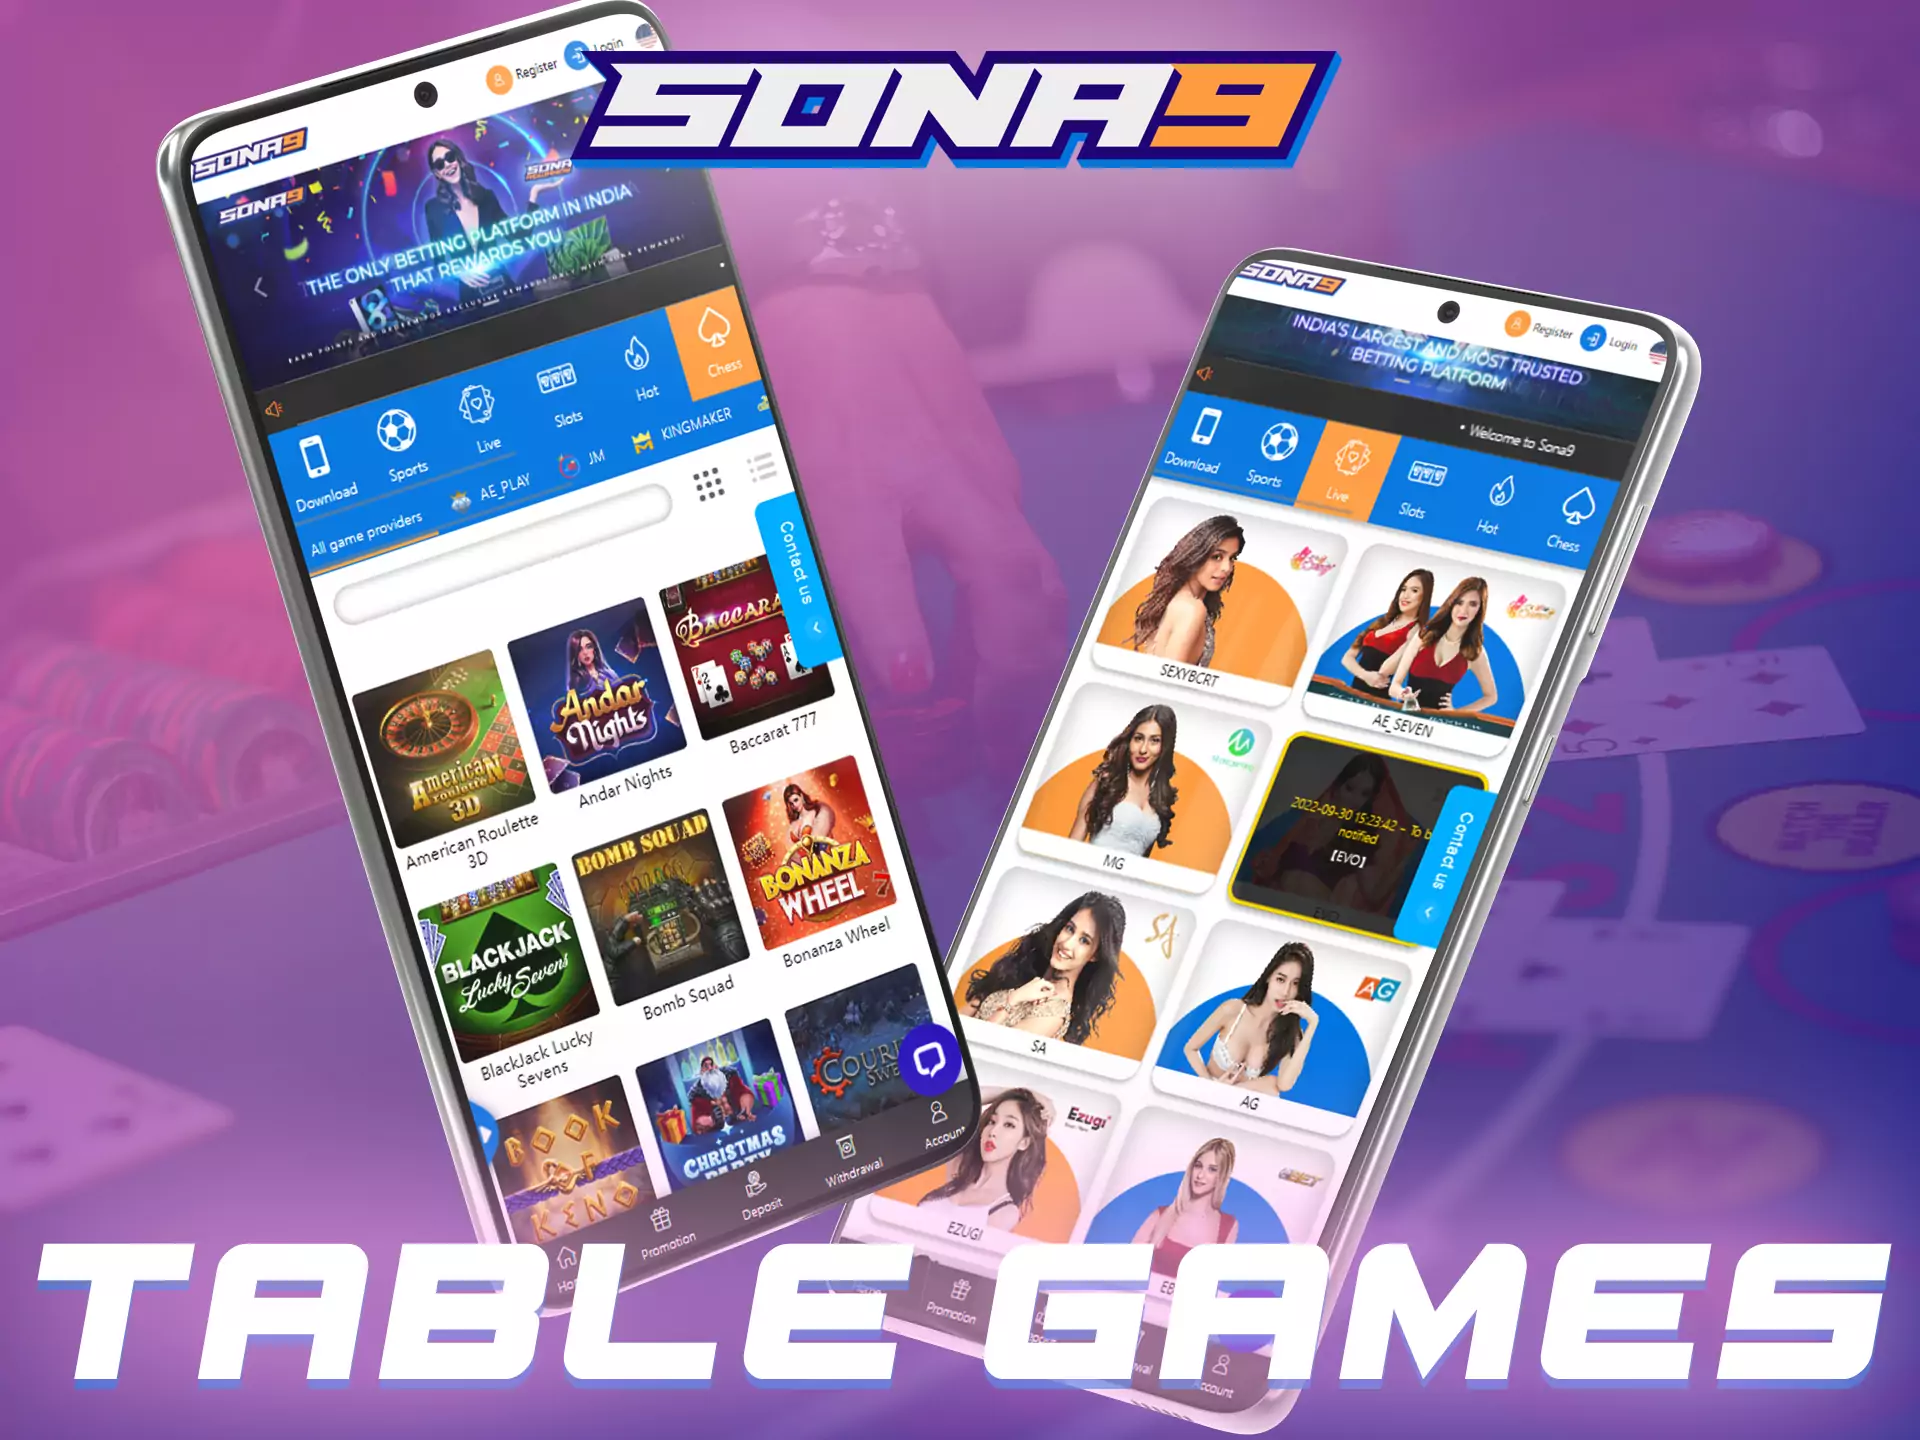 In the casino section of the Sona9 app, users play table games as well.